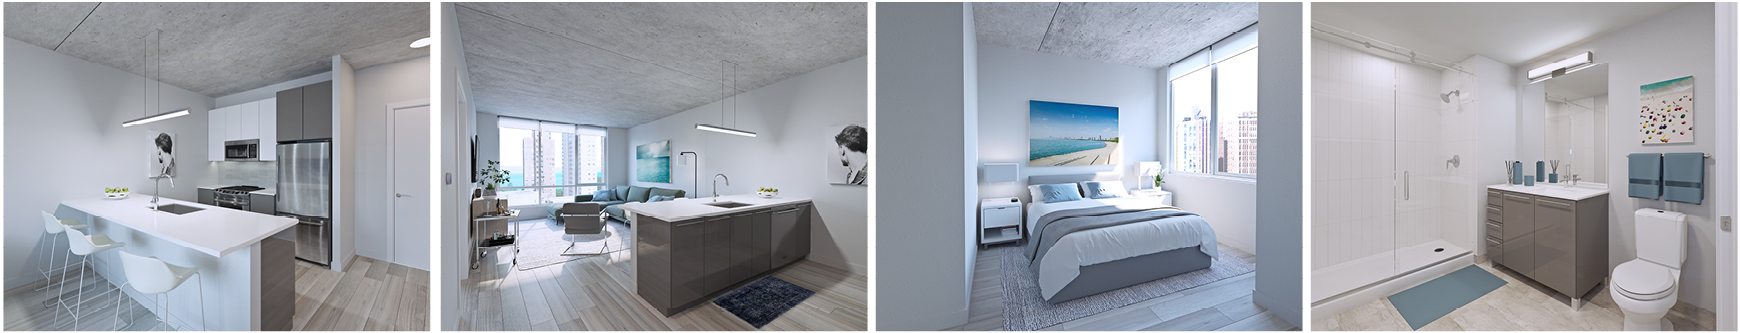 Interior renderings of the brand-new Lakeview apartments at Viridian on Sheridan.